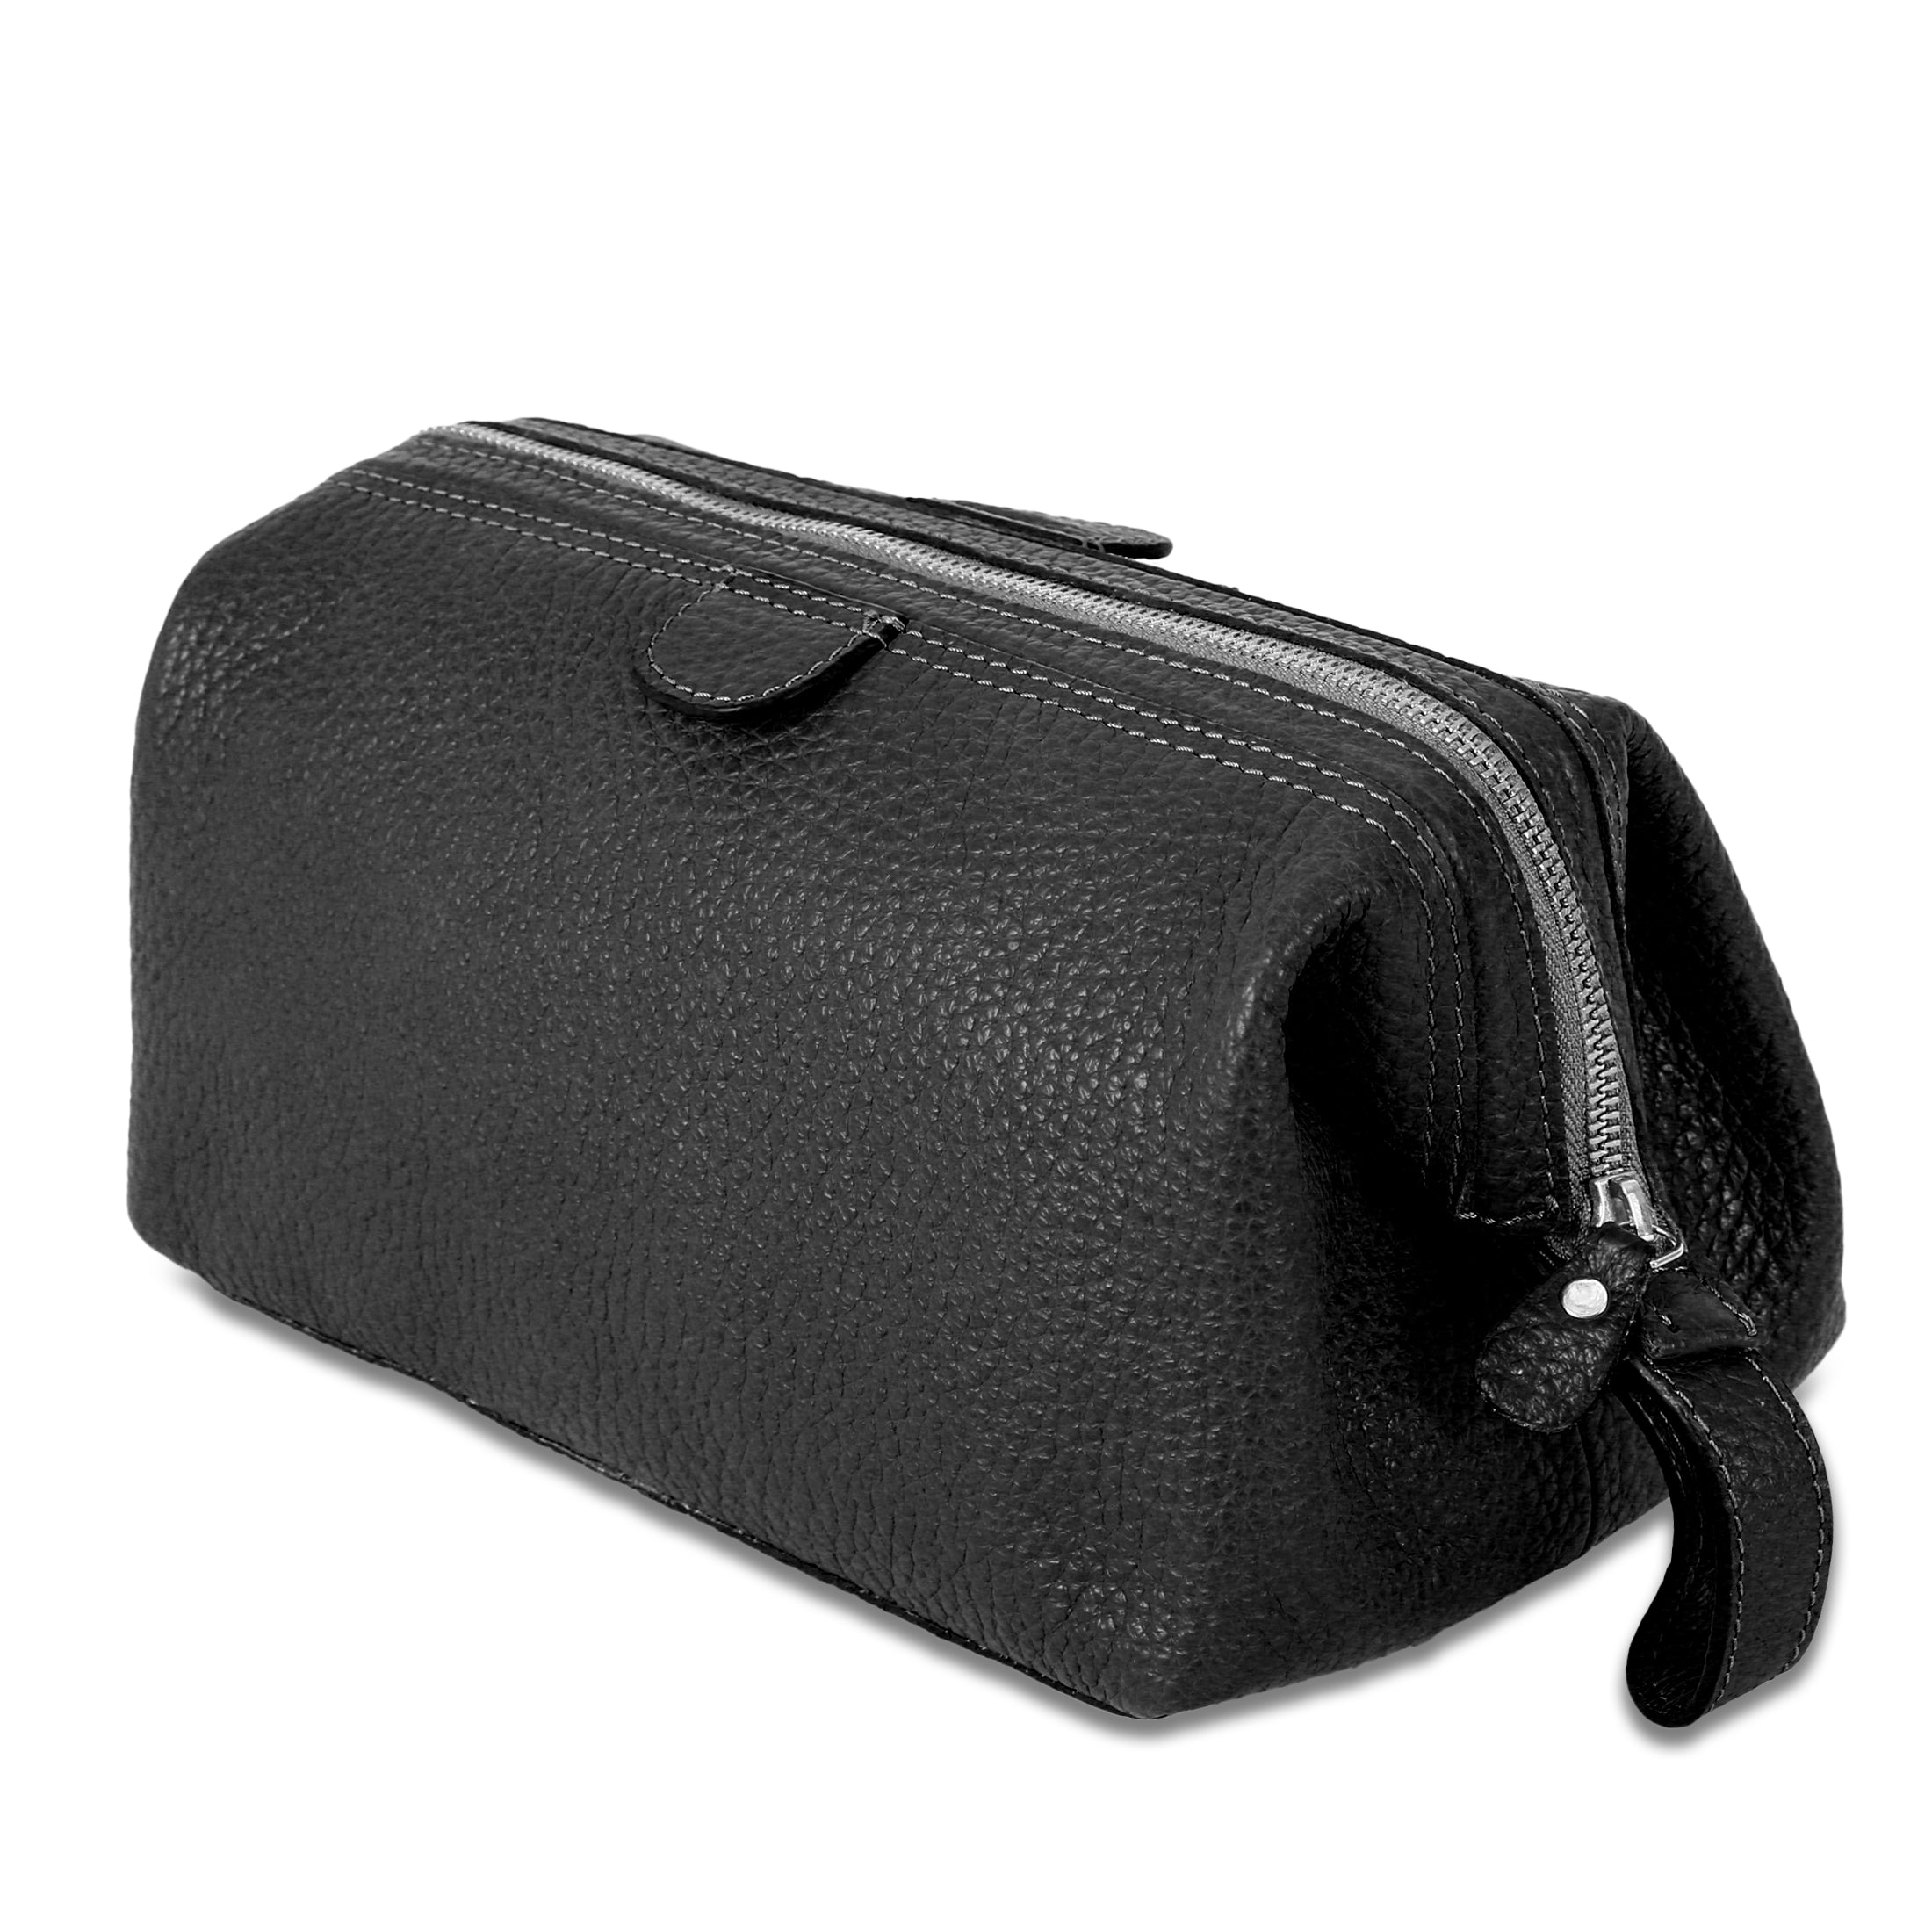 Large Premium Leather toiletry bag for Women and Men, travel utility D